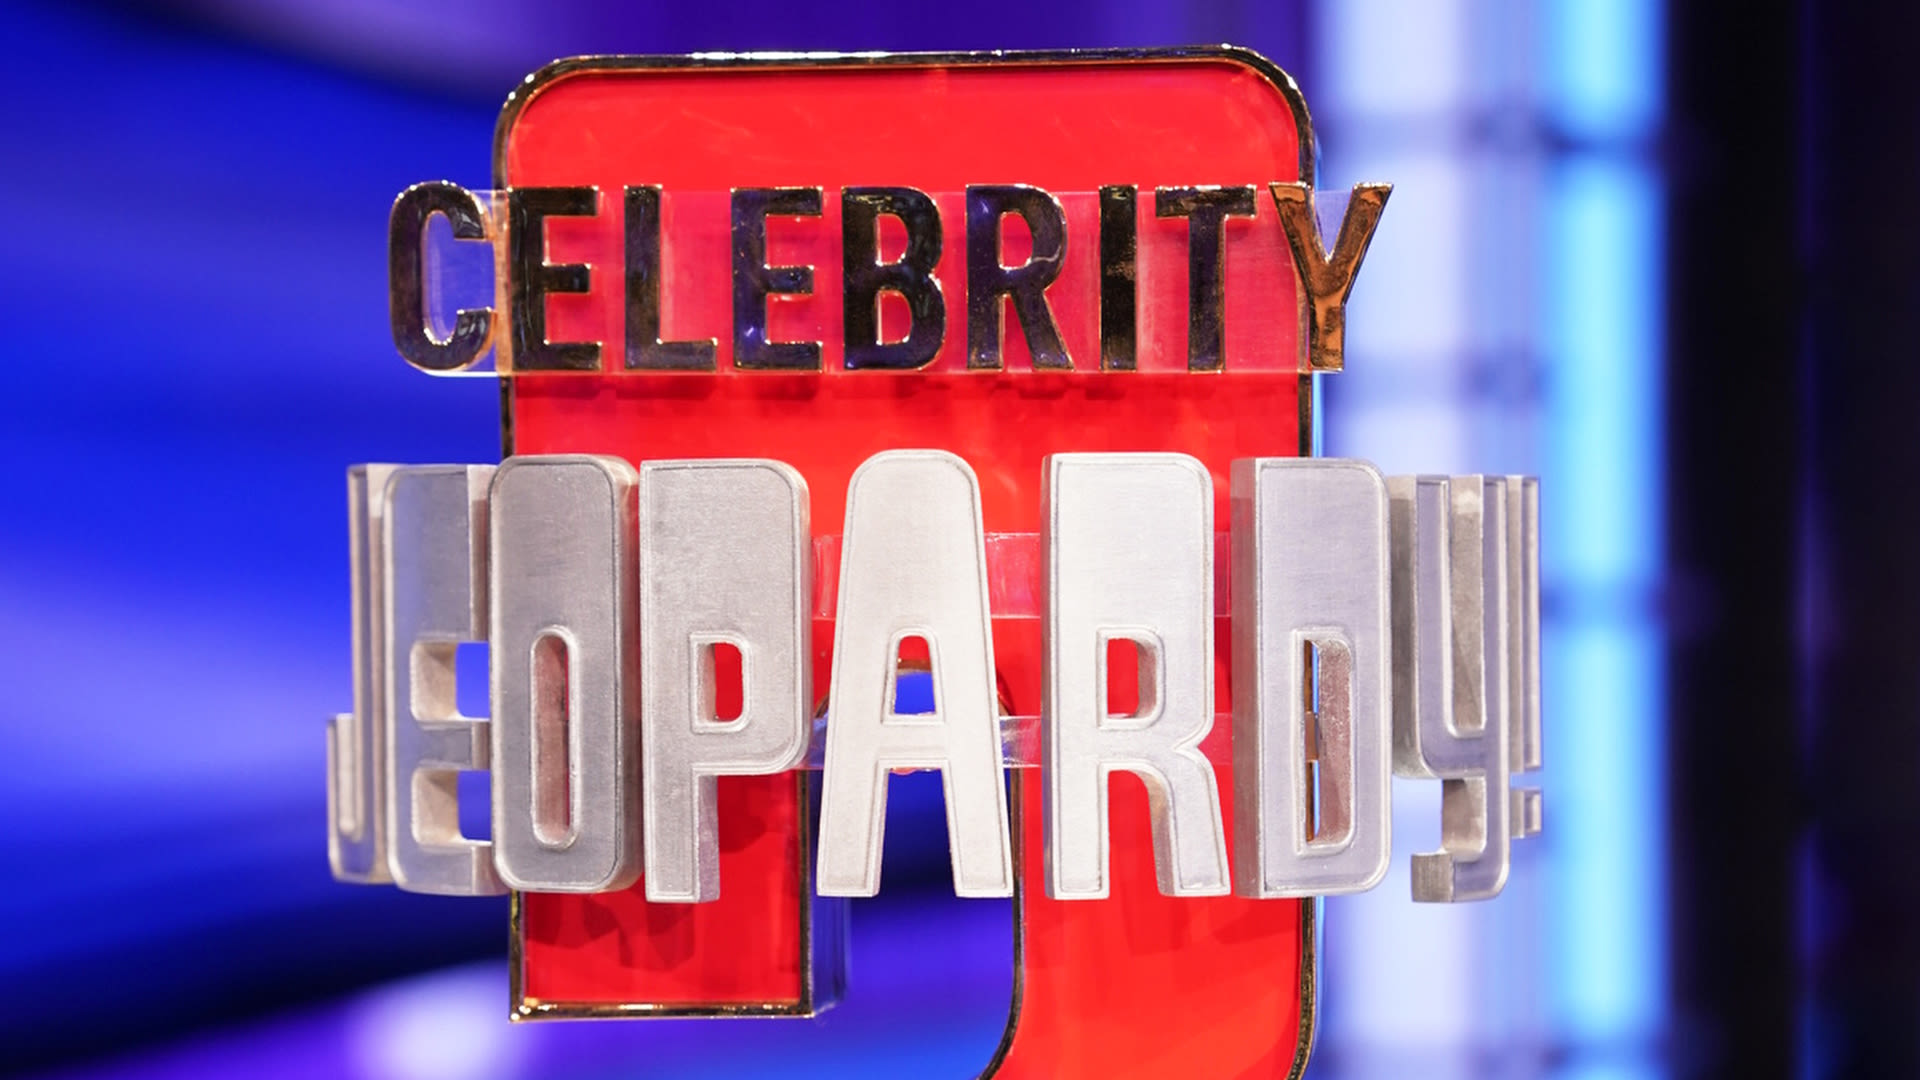 Celebrity Jeopardy! gets renewed as fans ‘highly doubt’ fired star will return’